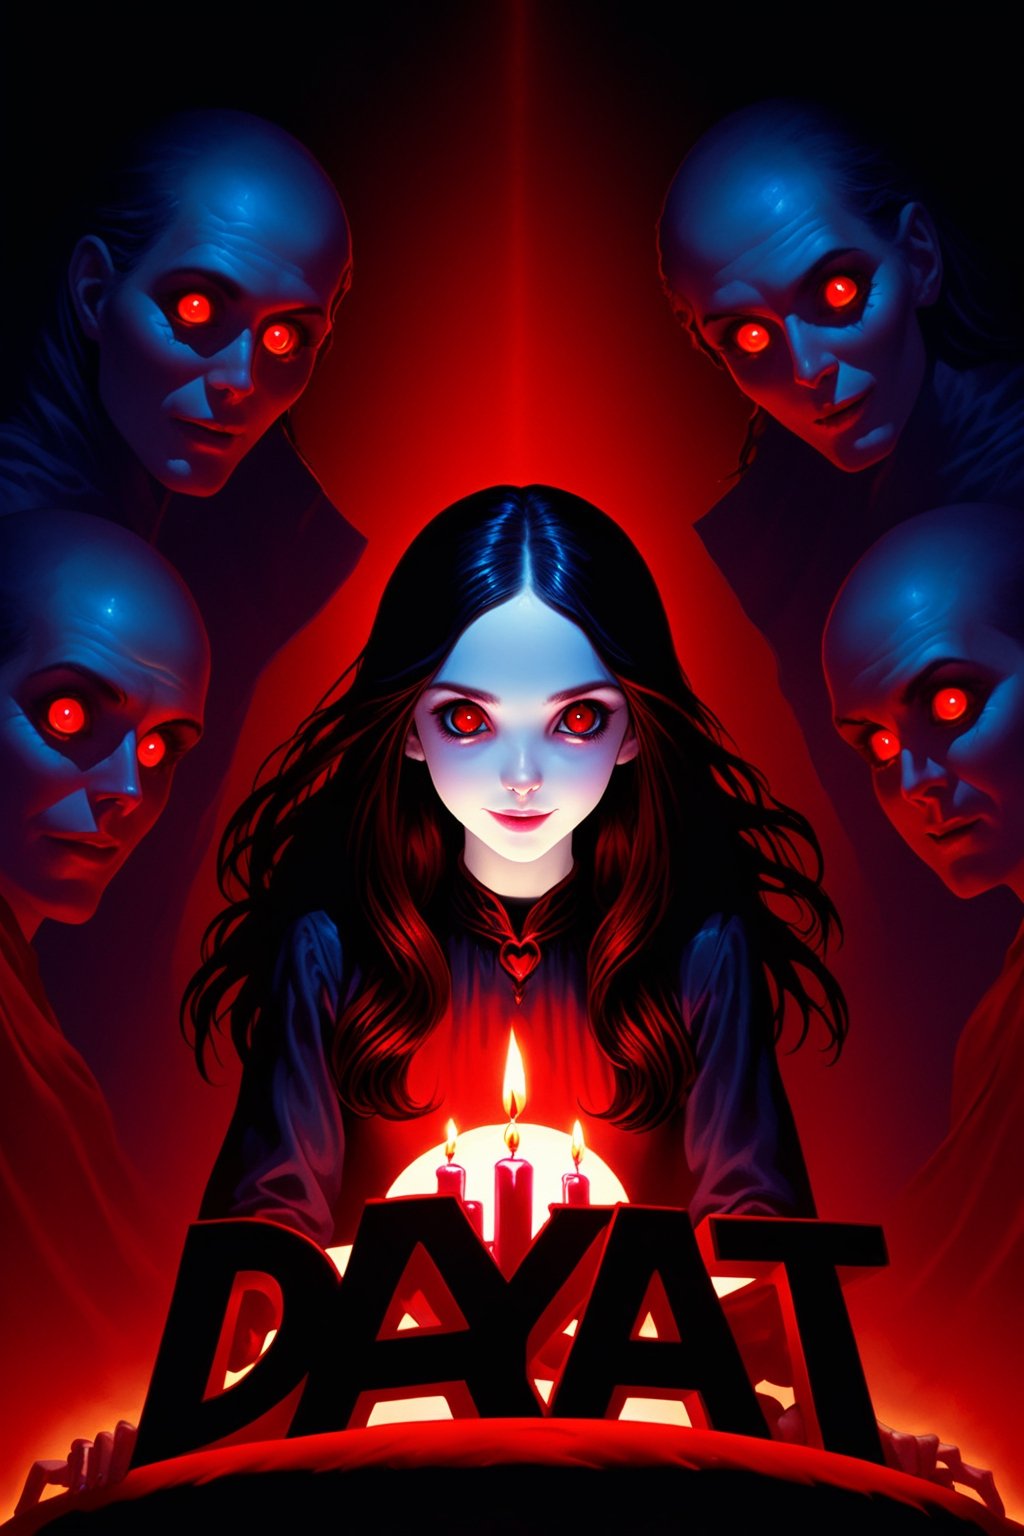 Masterpiece, best quality, ultra detailed, detailed face, detailed eyes, dark fantasy art, ((horror and dramatic)), 14 years old girl, upper body, beautiful girl, cute, (pale skin), long black hair, in ear hair, smile, red birthday cake at table, holding a big black sign with (("DAYAT")), text logo, black, red, glowing, glow:1.3, with her hands, (red glowing eyes), sitting at night castle, focus on viewer, front view, Movie Still, upper body, monster, HellAi, Text logo